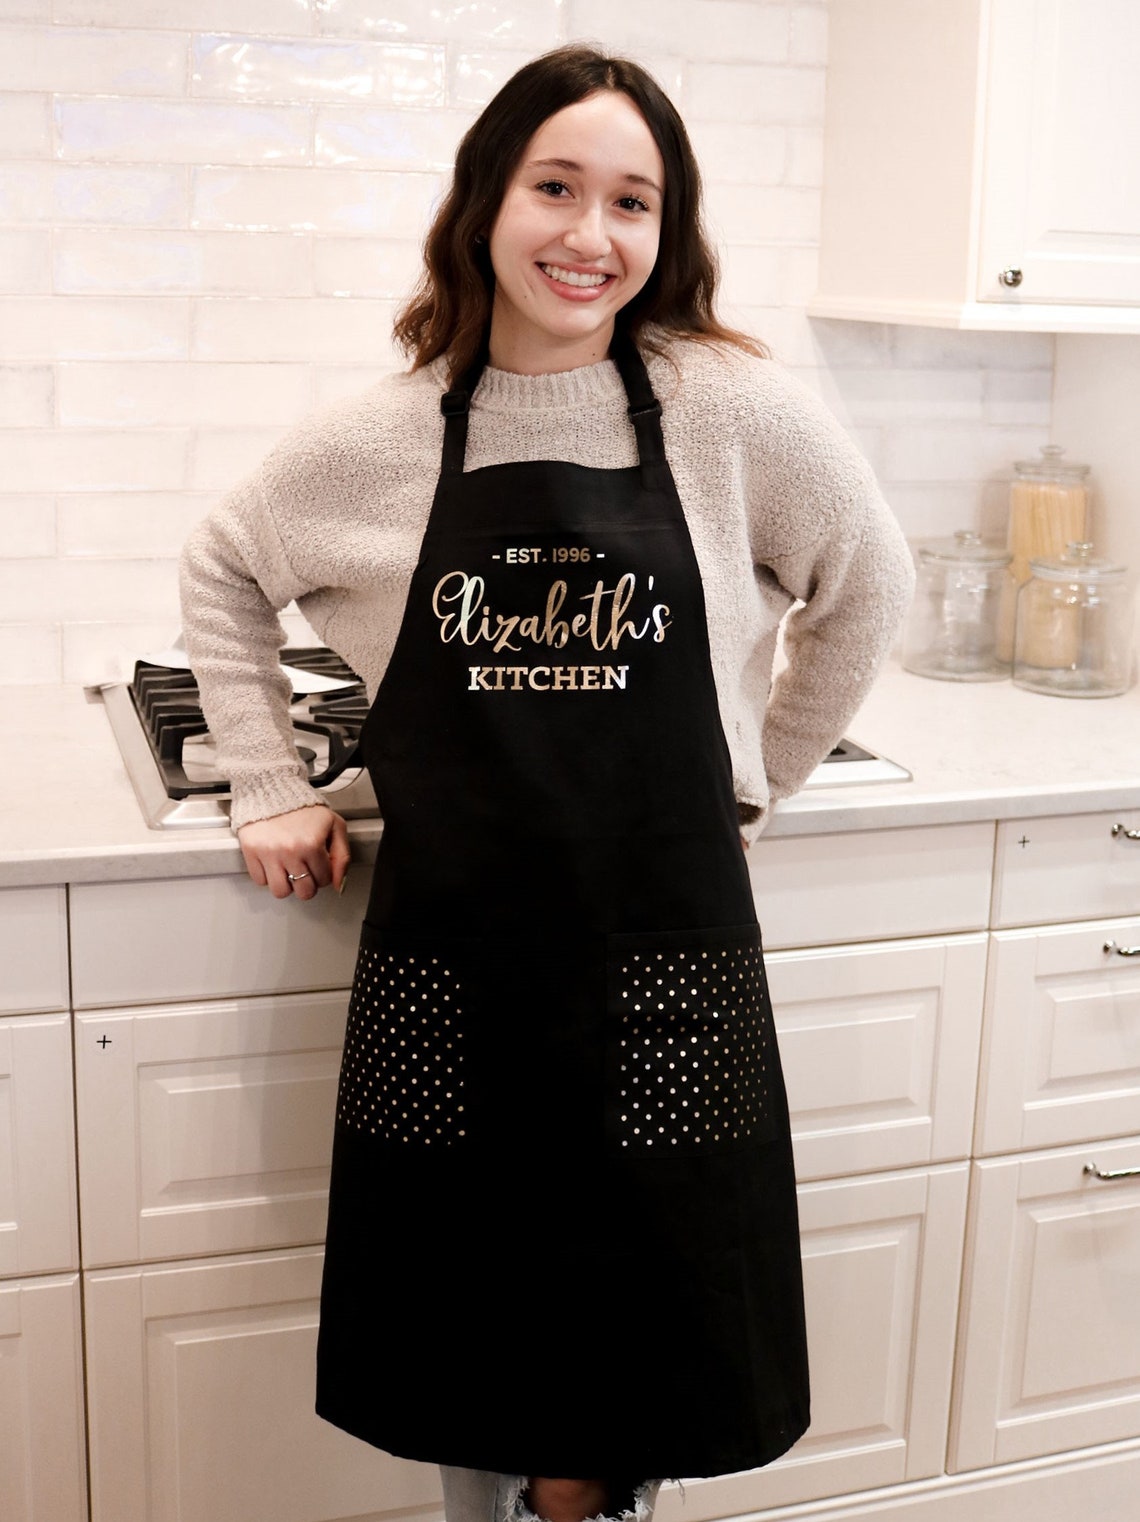 A brown-haired young woman smiles in her classy white kitchen. She is wearing a beige sweater under a black full length apron with Elizabeth's kitchen in gold letters. Personalized accessories make great gifts for crafters. 